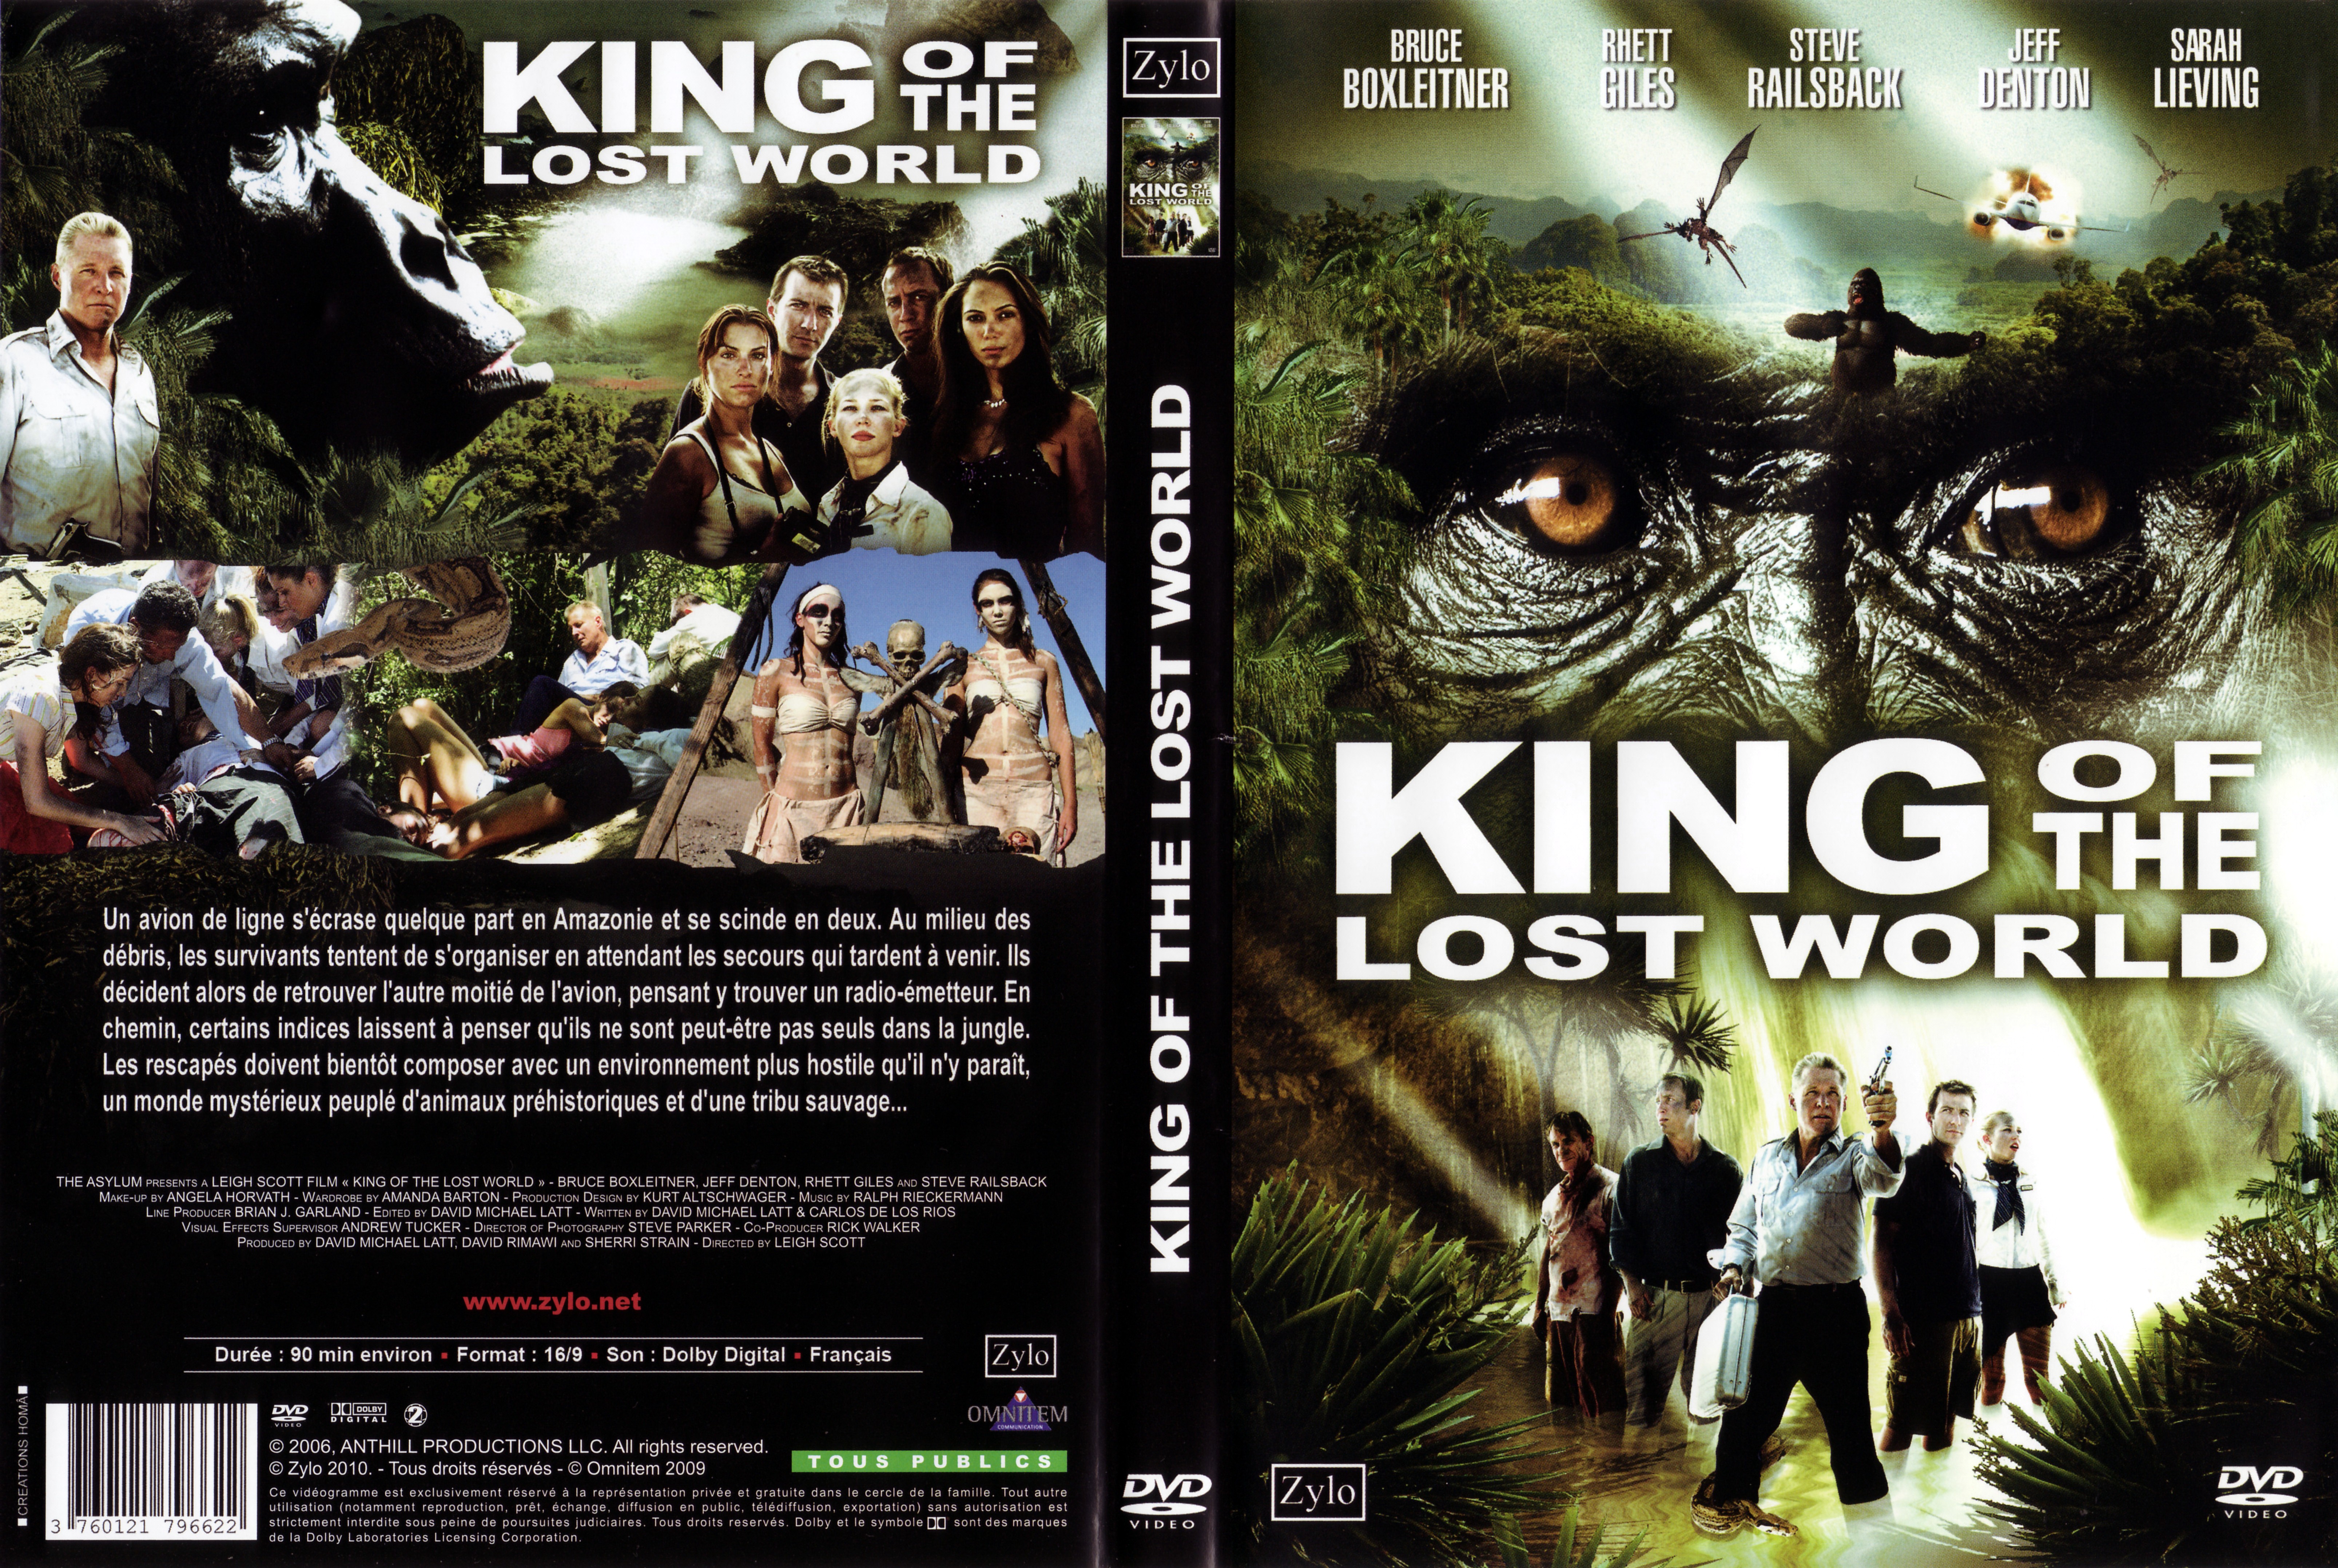 Jaquette DVD King of the lost world